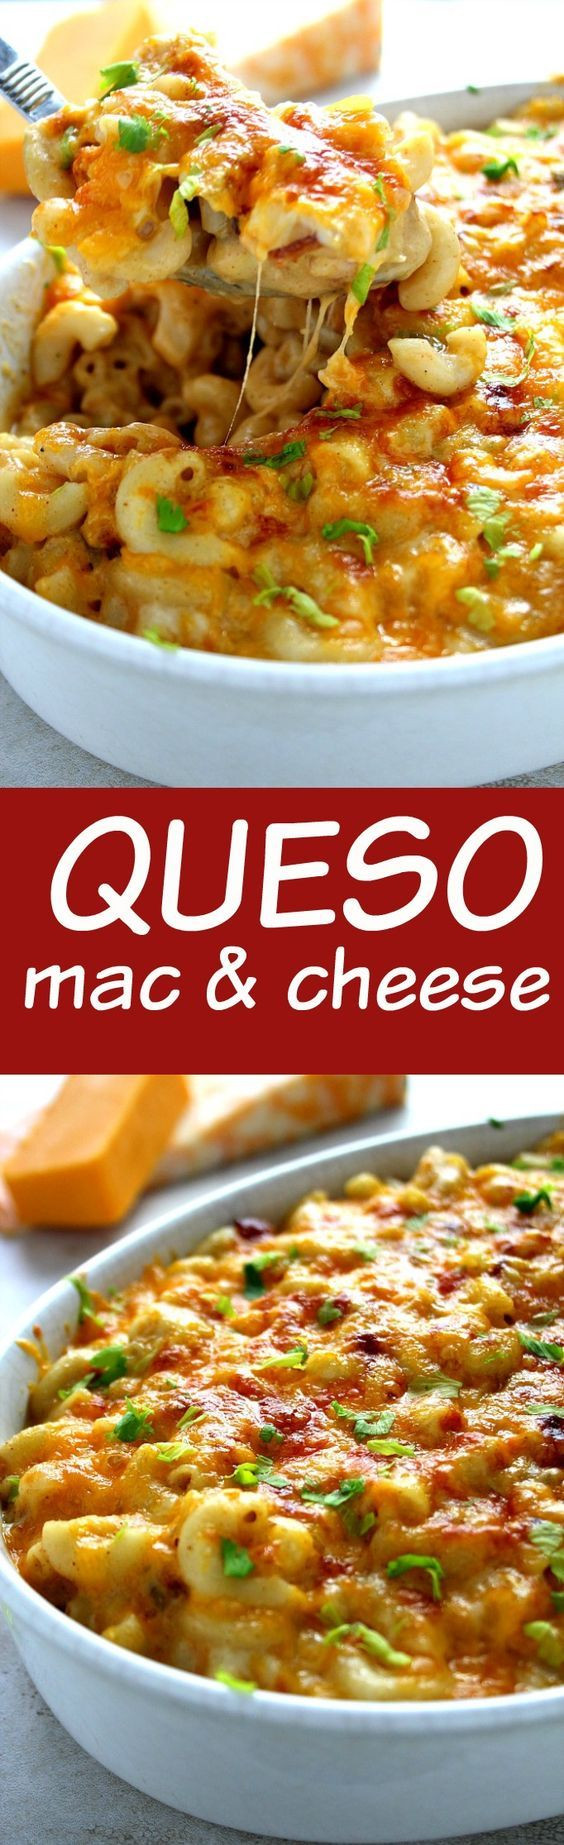 Mexican Mac And Cheese Recipes
 Queso Mac and Cheese with Bacon cheesy macaroni baked in